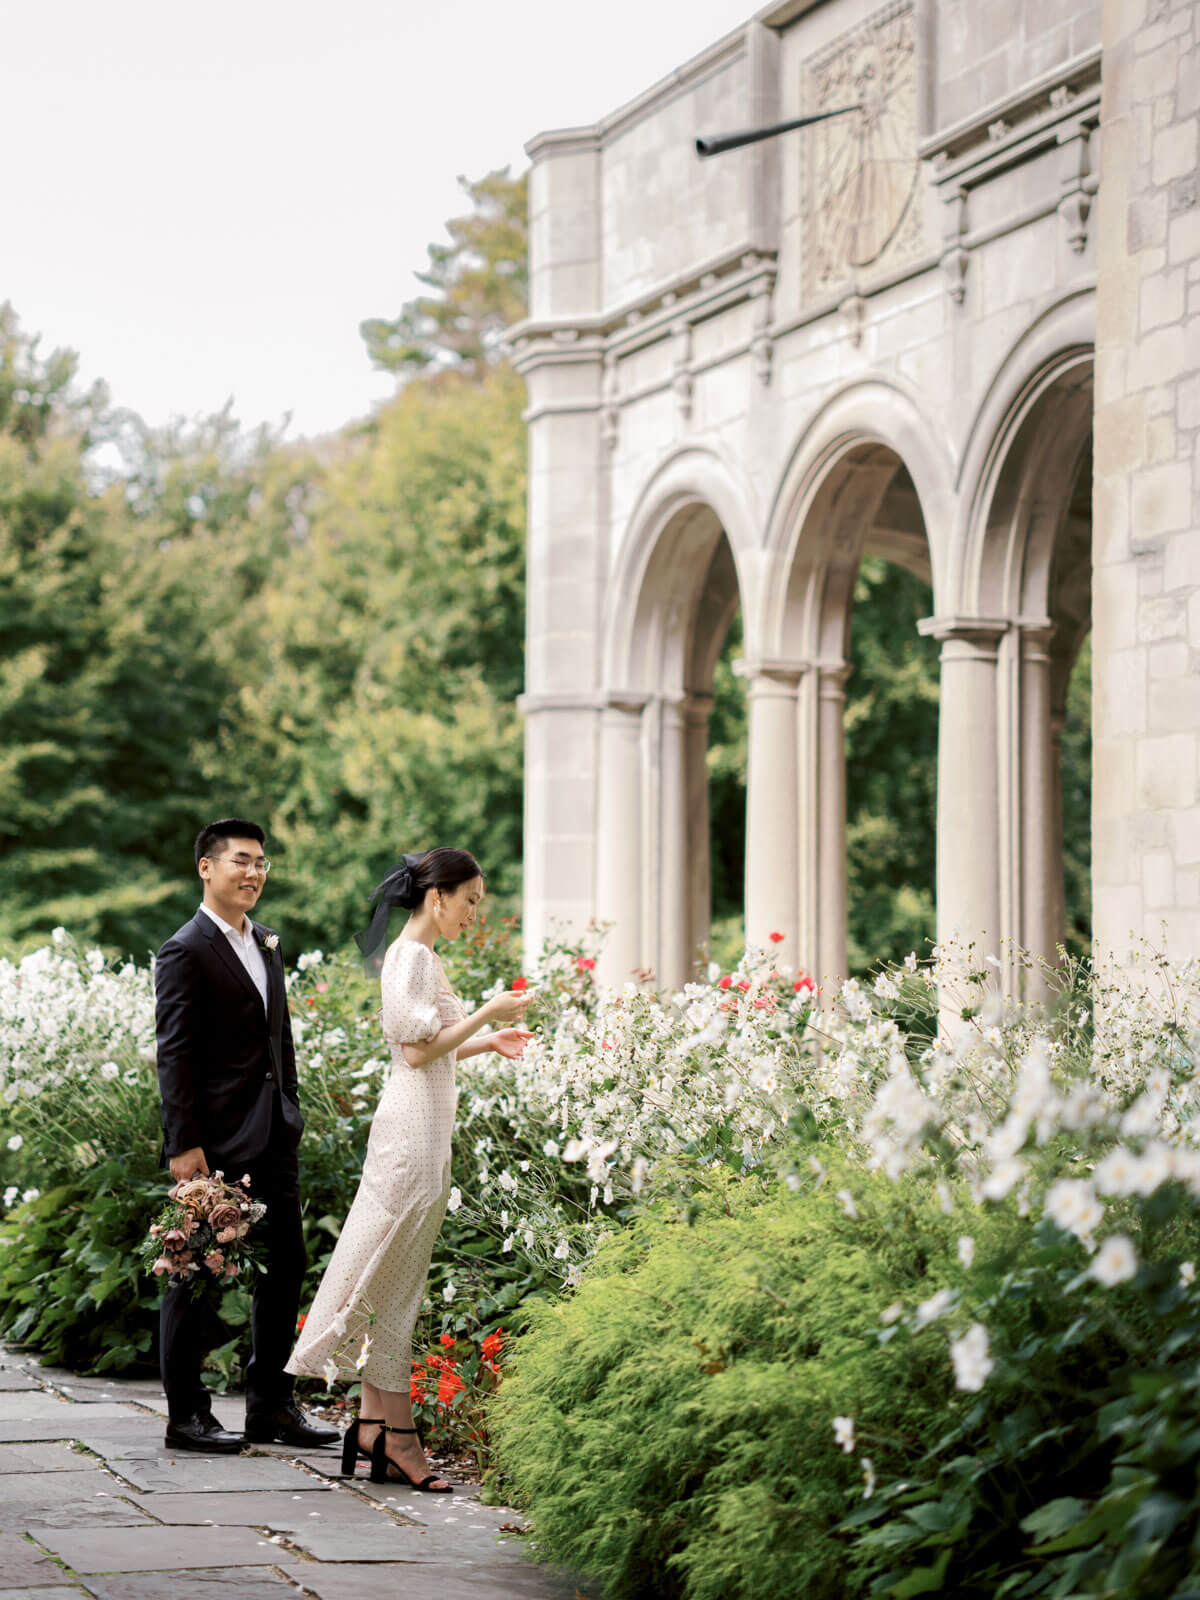 The bride and the groom are amidst the beautiful flowers in Planting Fields Arboretum, Oyster Bay, NY. Image by Jenny Fu Studio